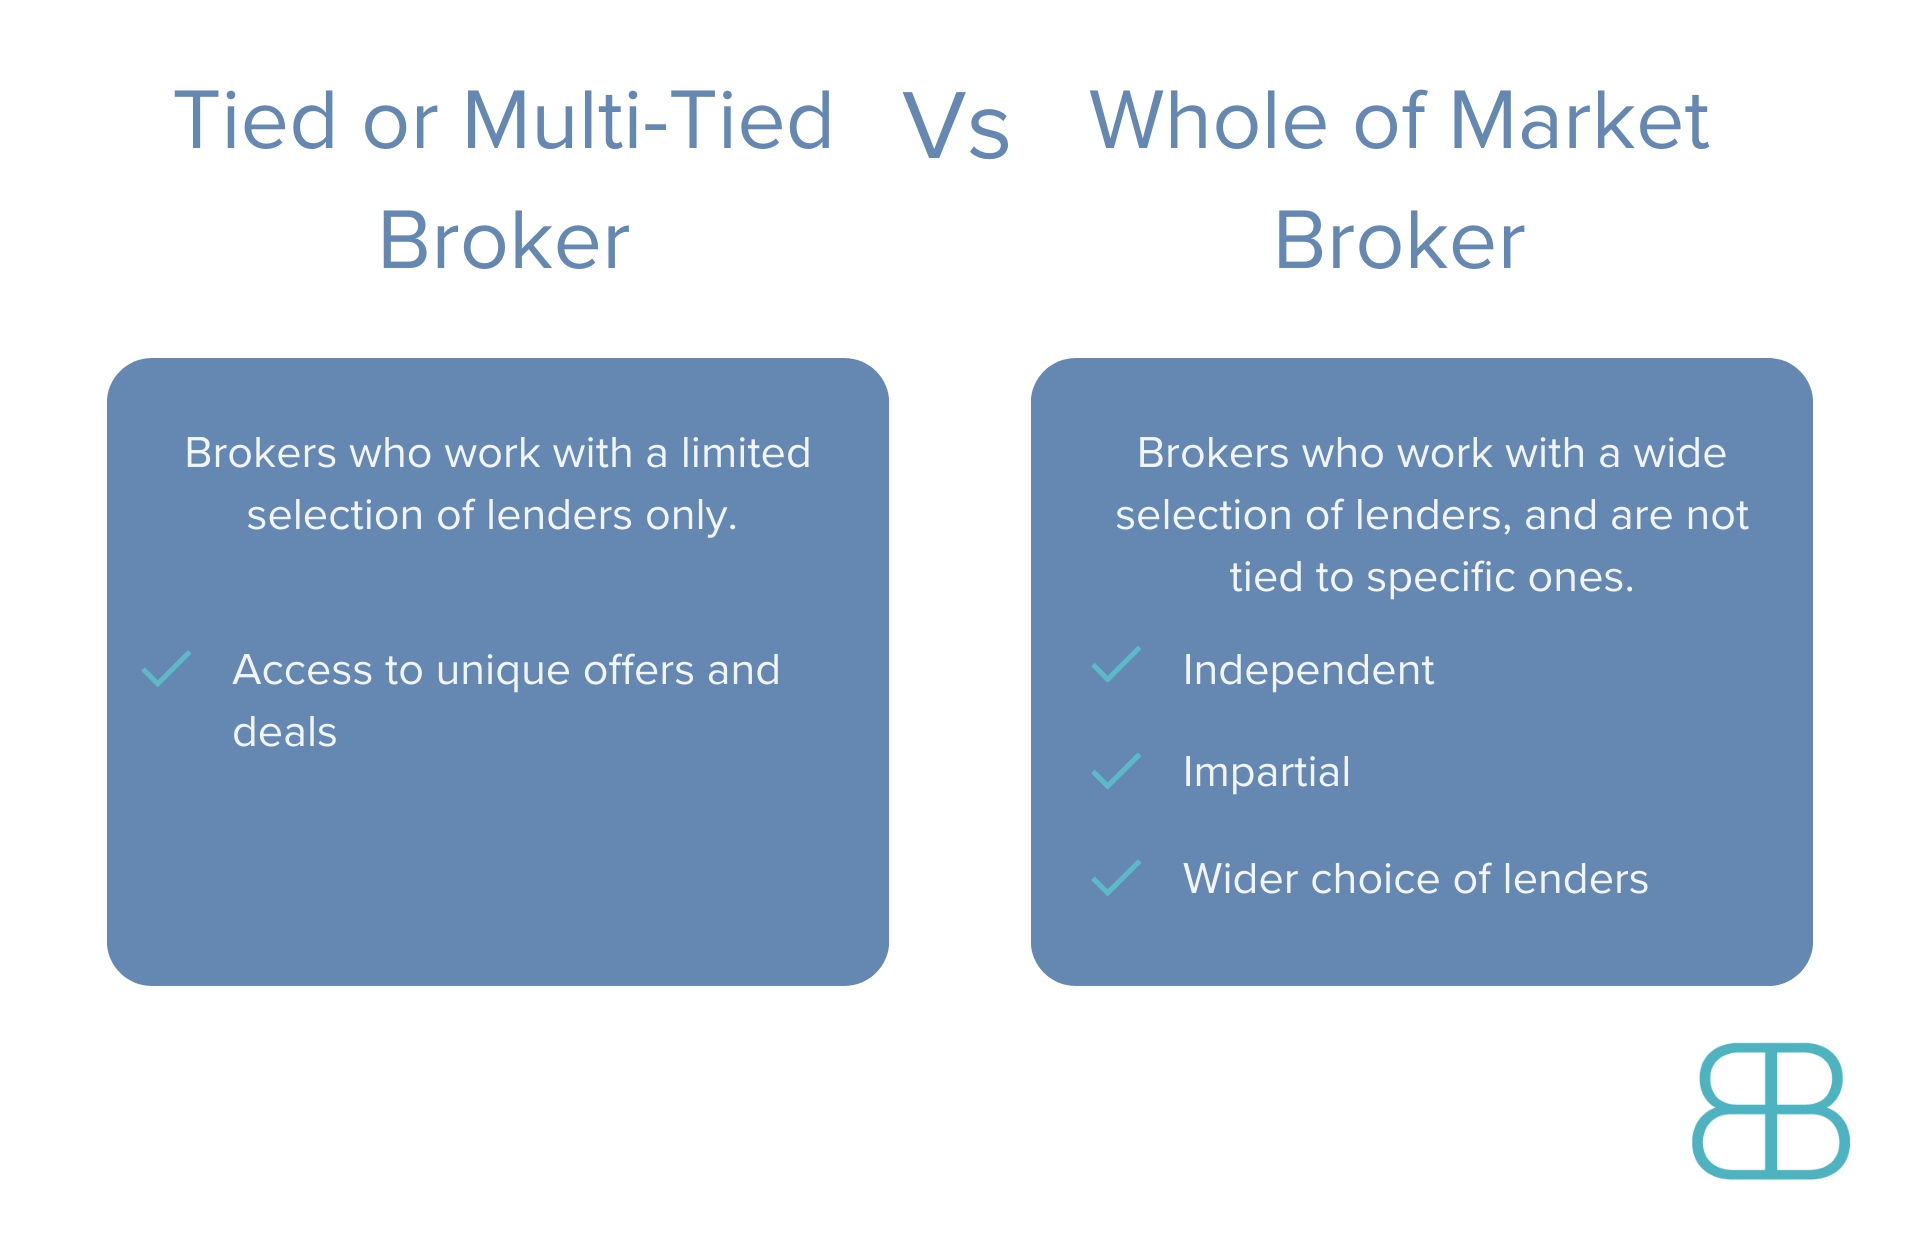 difference between tied and whole of market mortgage broker